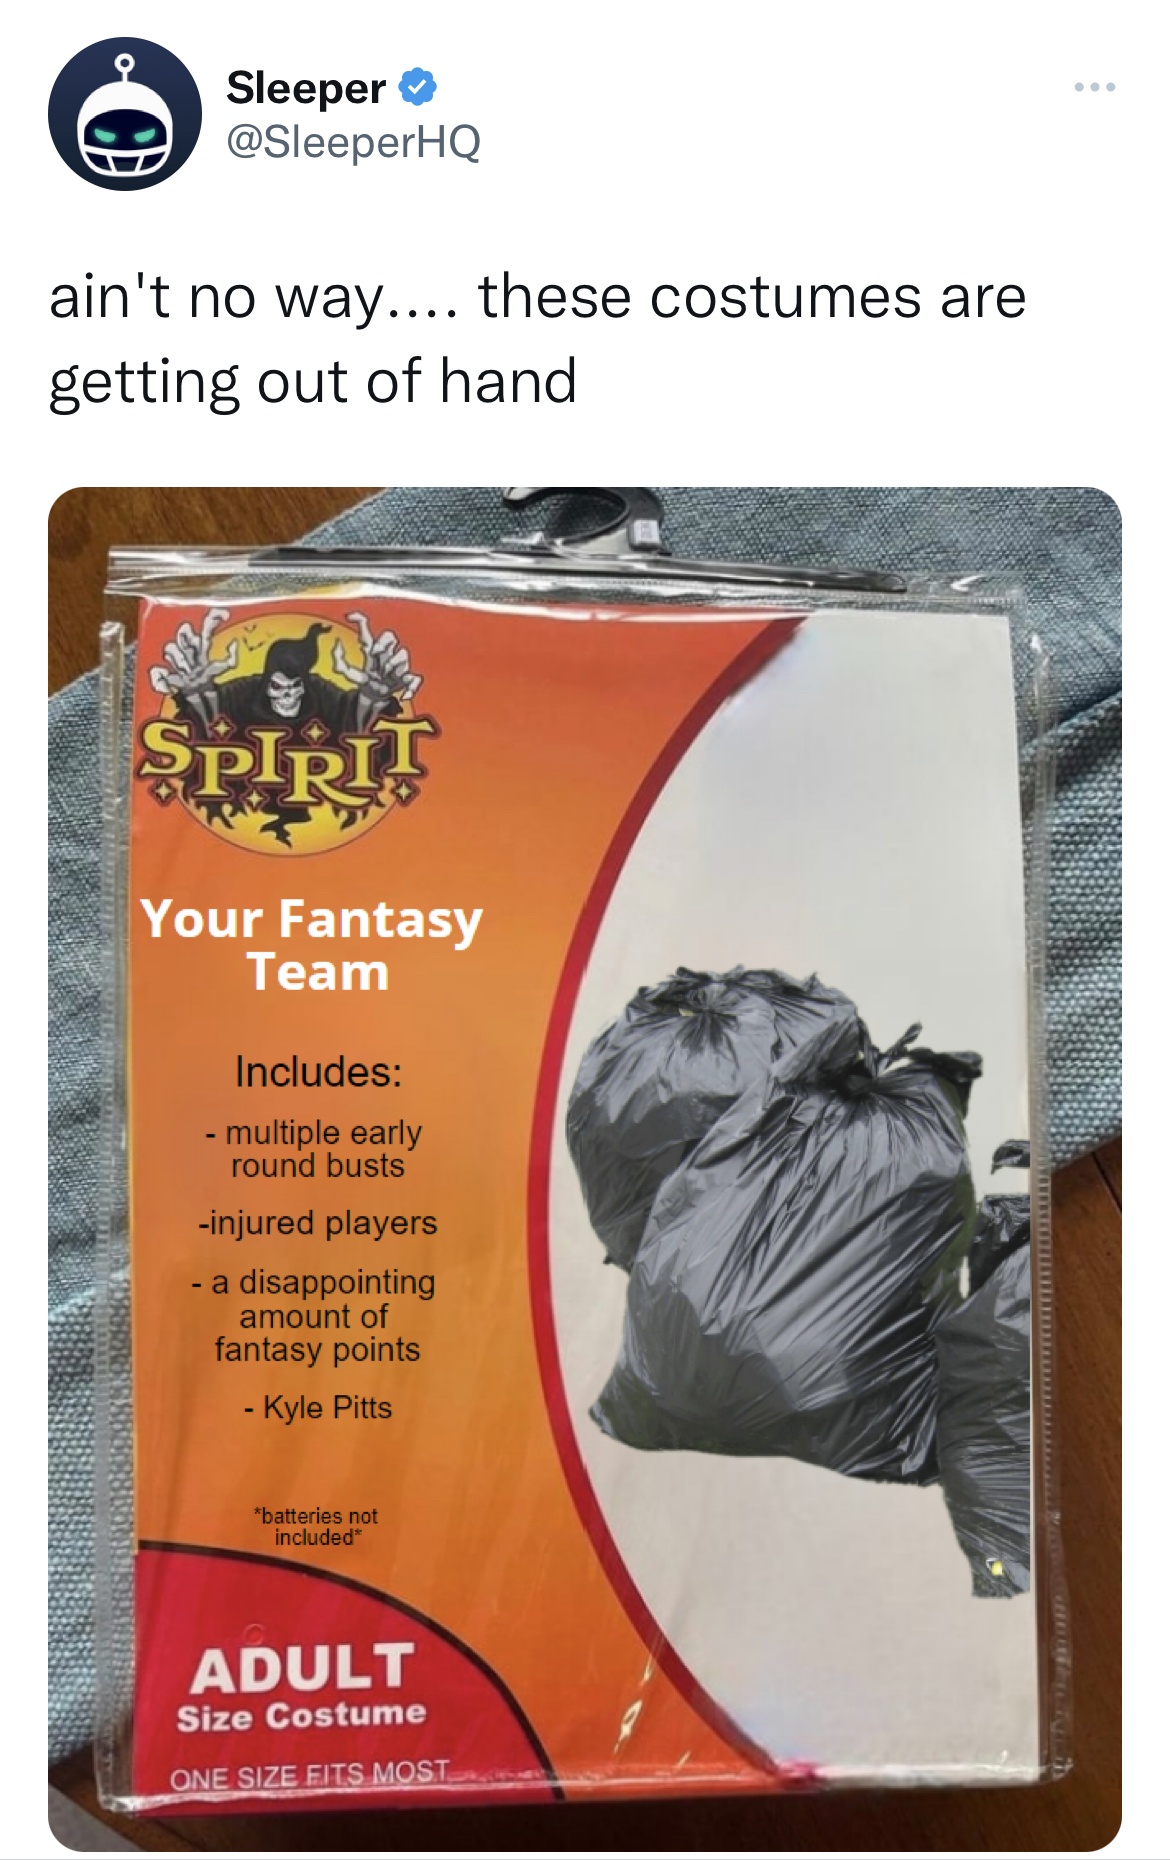 Costume Memes - spirit halloween - Sleeper ain't no way.... these costumes are getting out of hand Pipii Your Fantasy Team Includes multiple early round busts injured players a disappointing amount of fantasy points Kyle Pitts nude Adult Size Costume One 